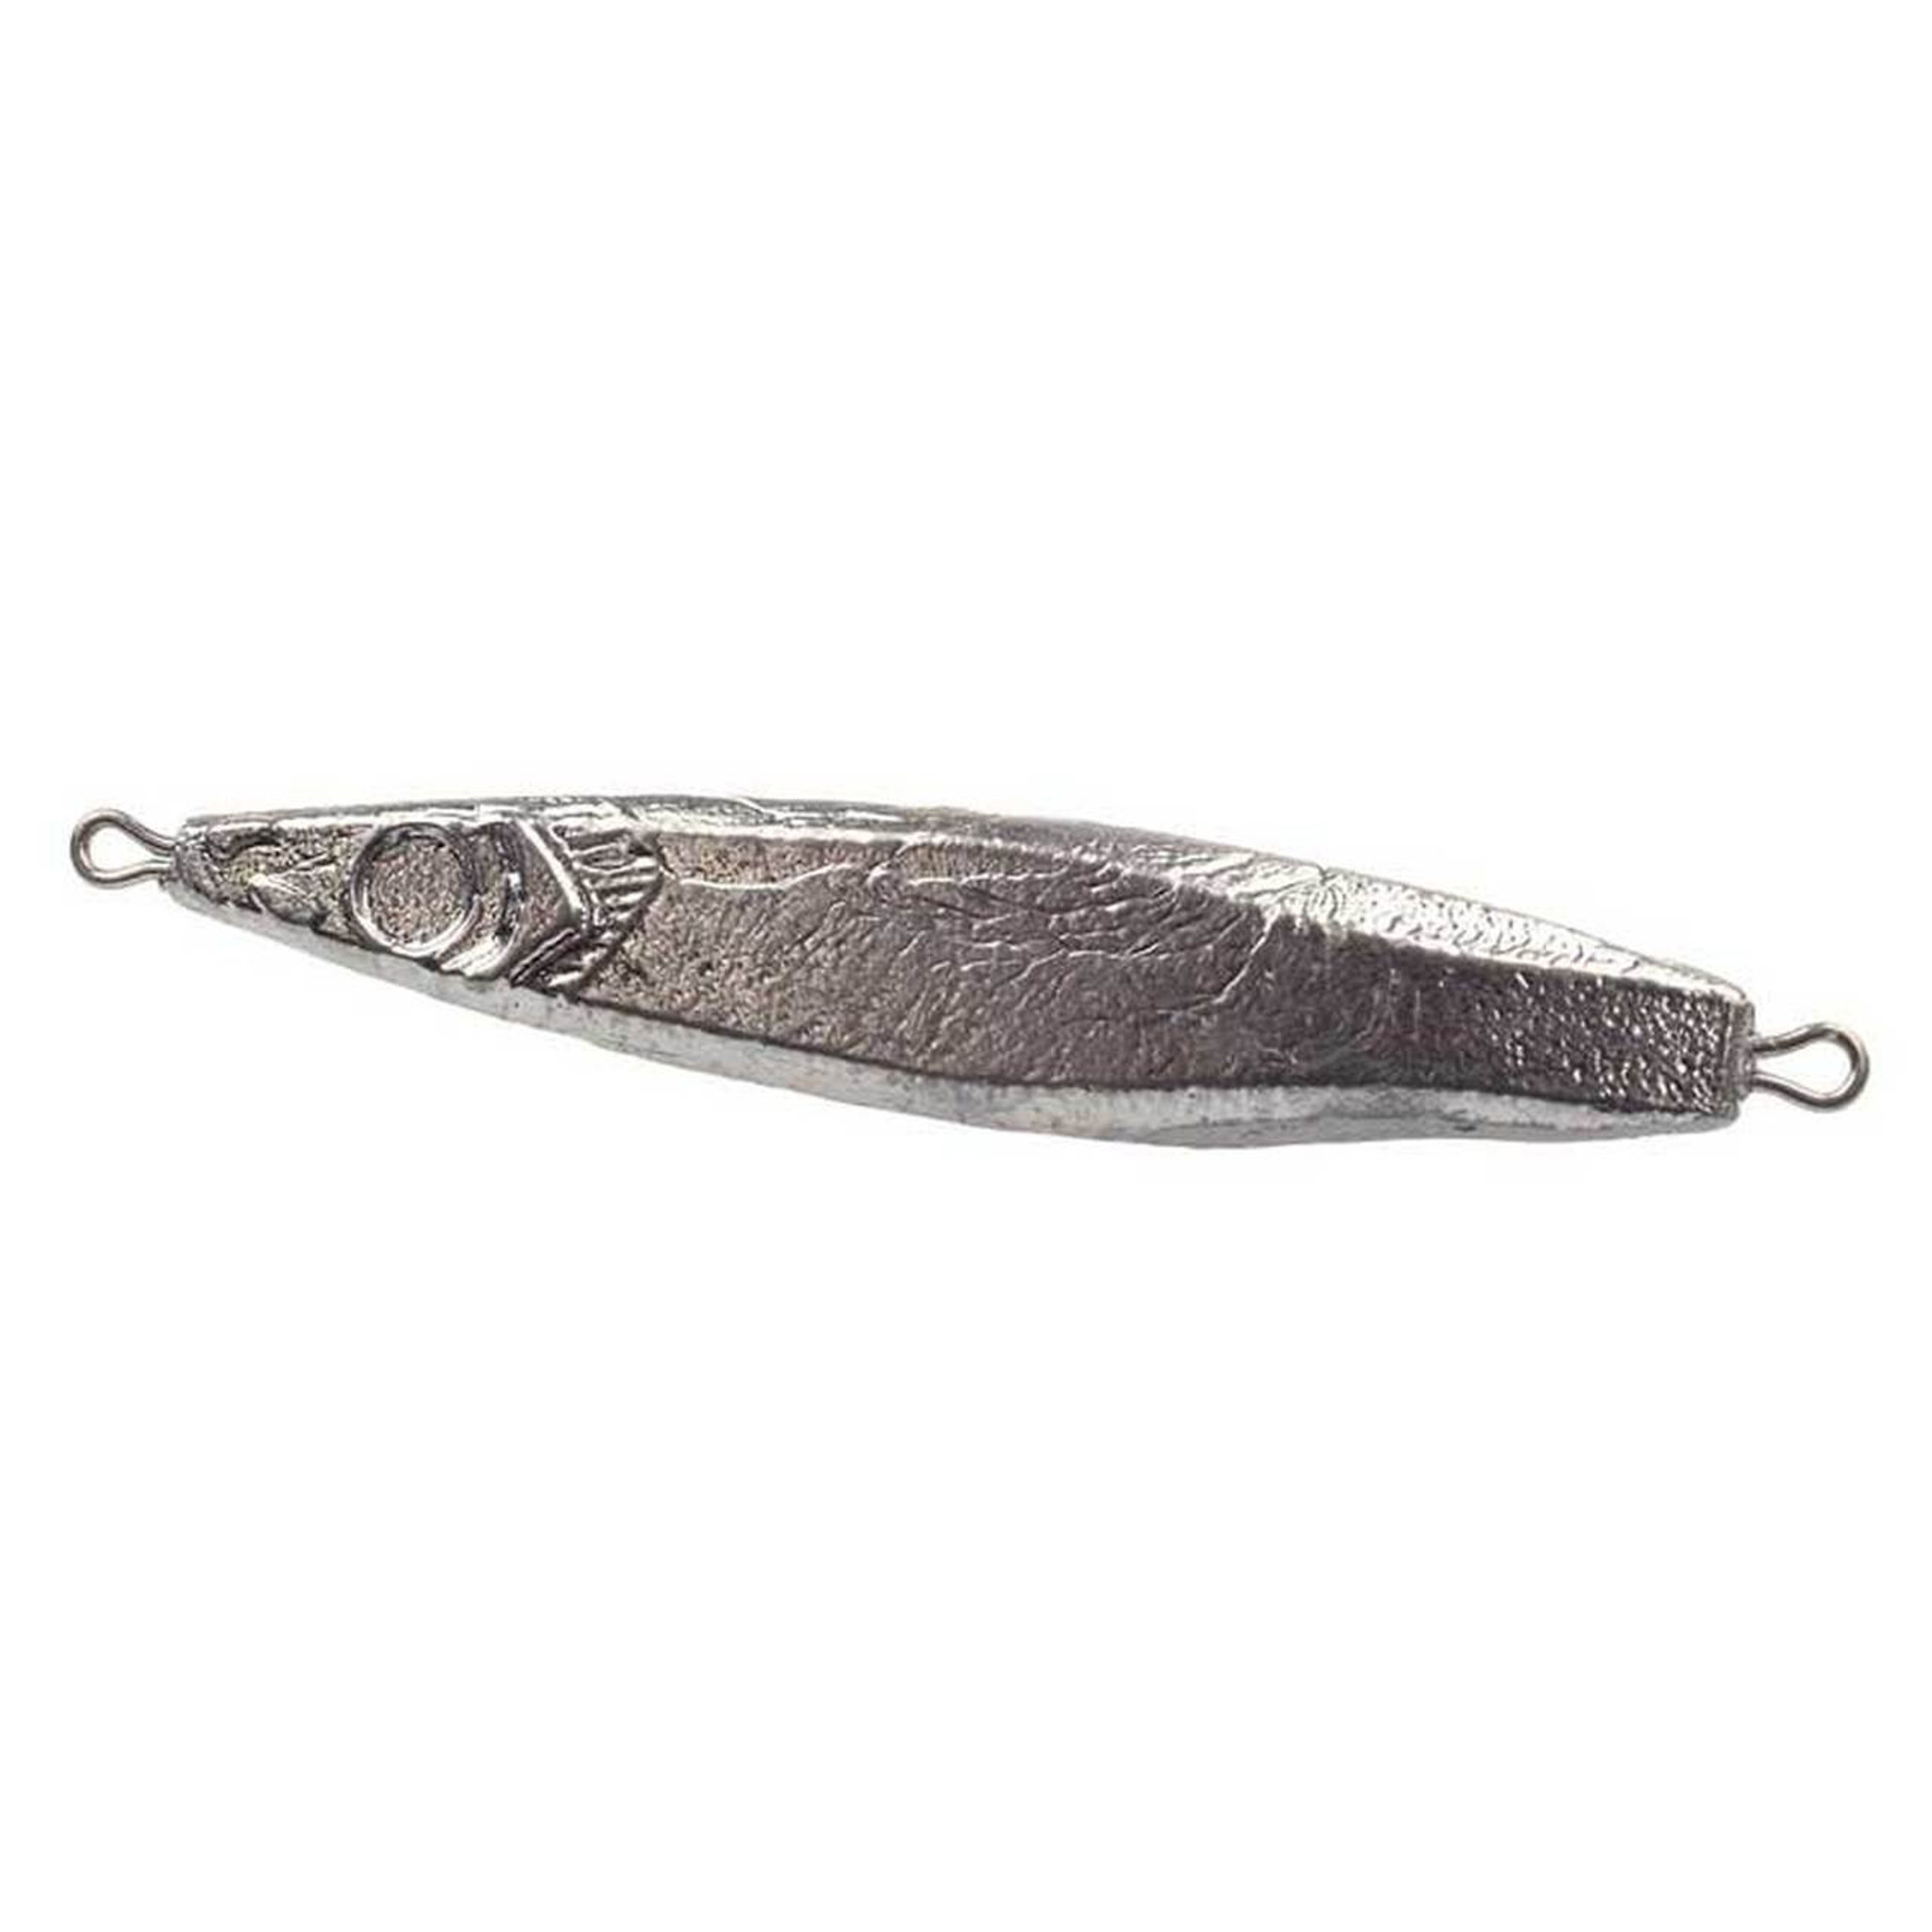 Flutter Lure Jig Fishing Sinker Lead Weight Bottom Fish - Coral